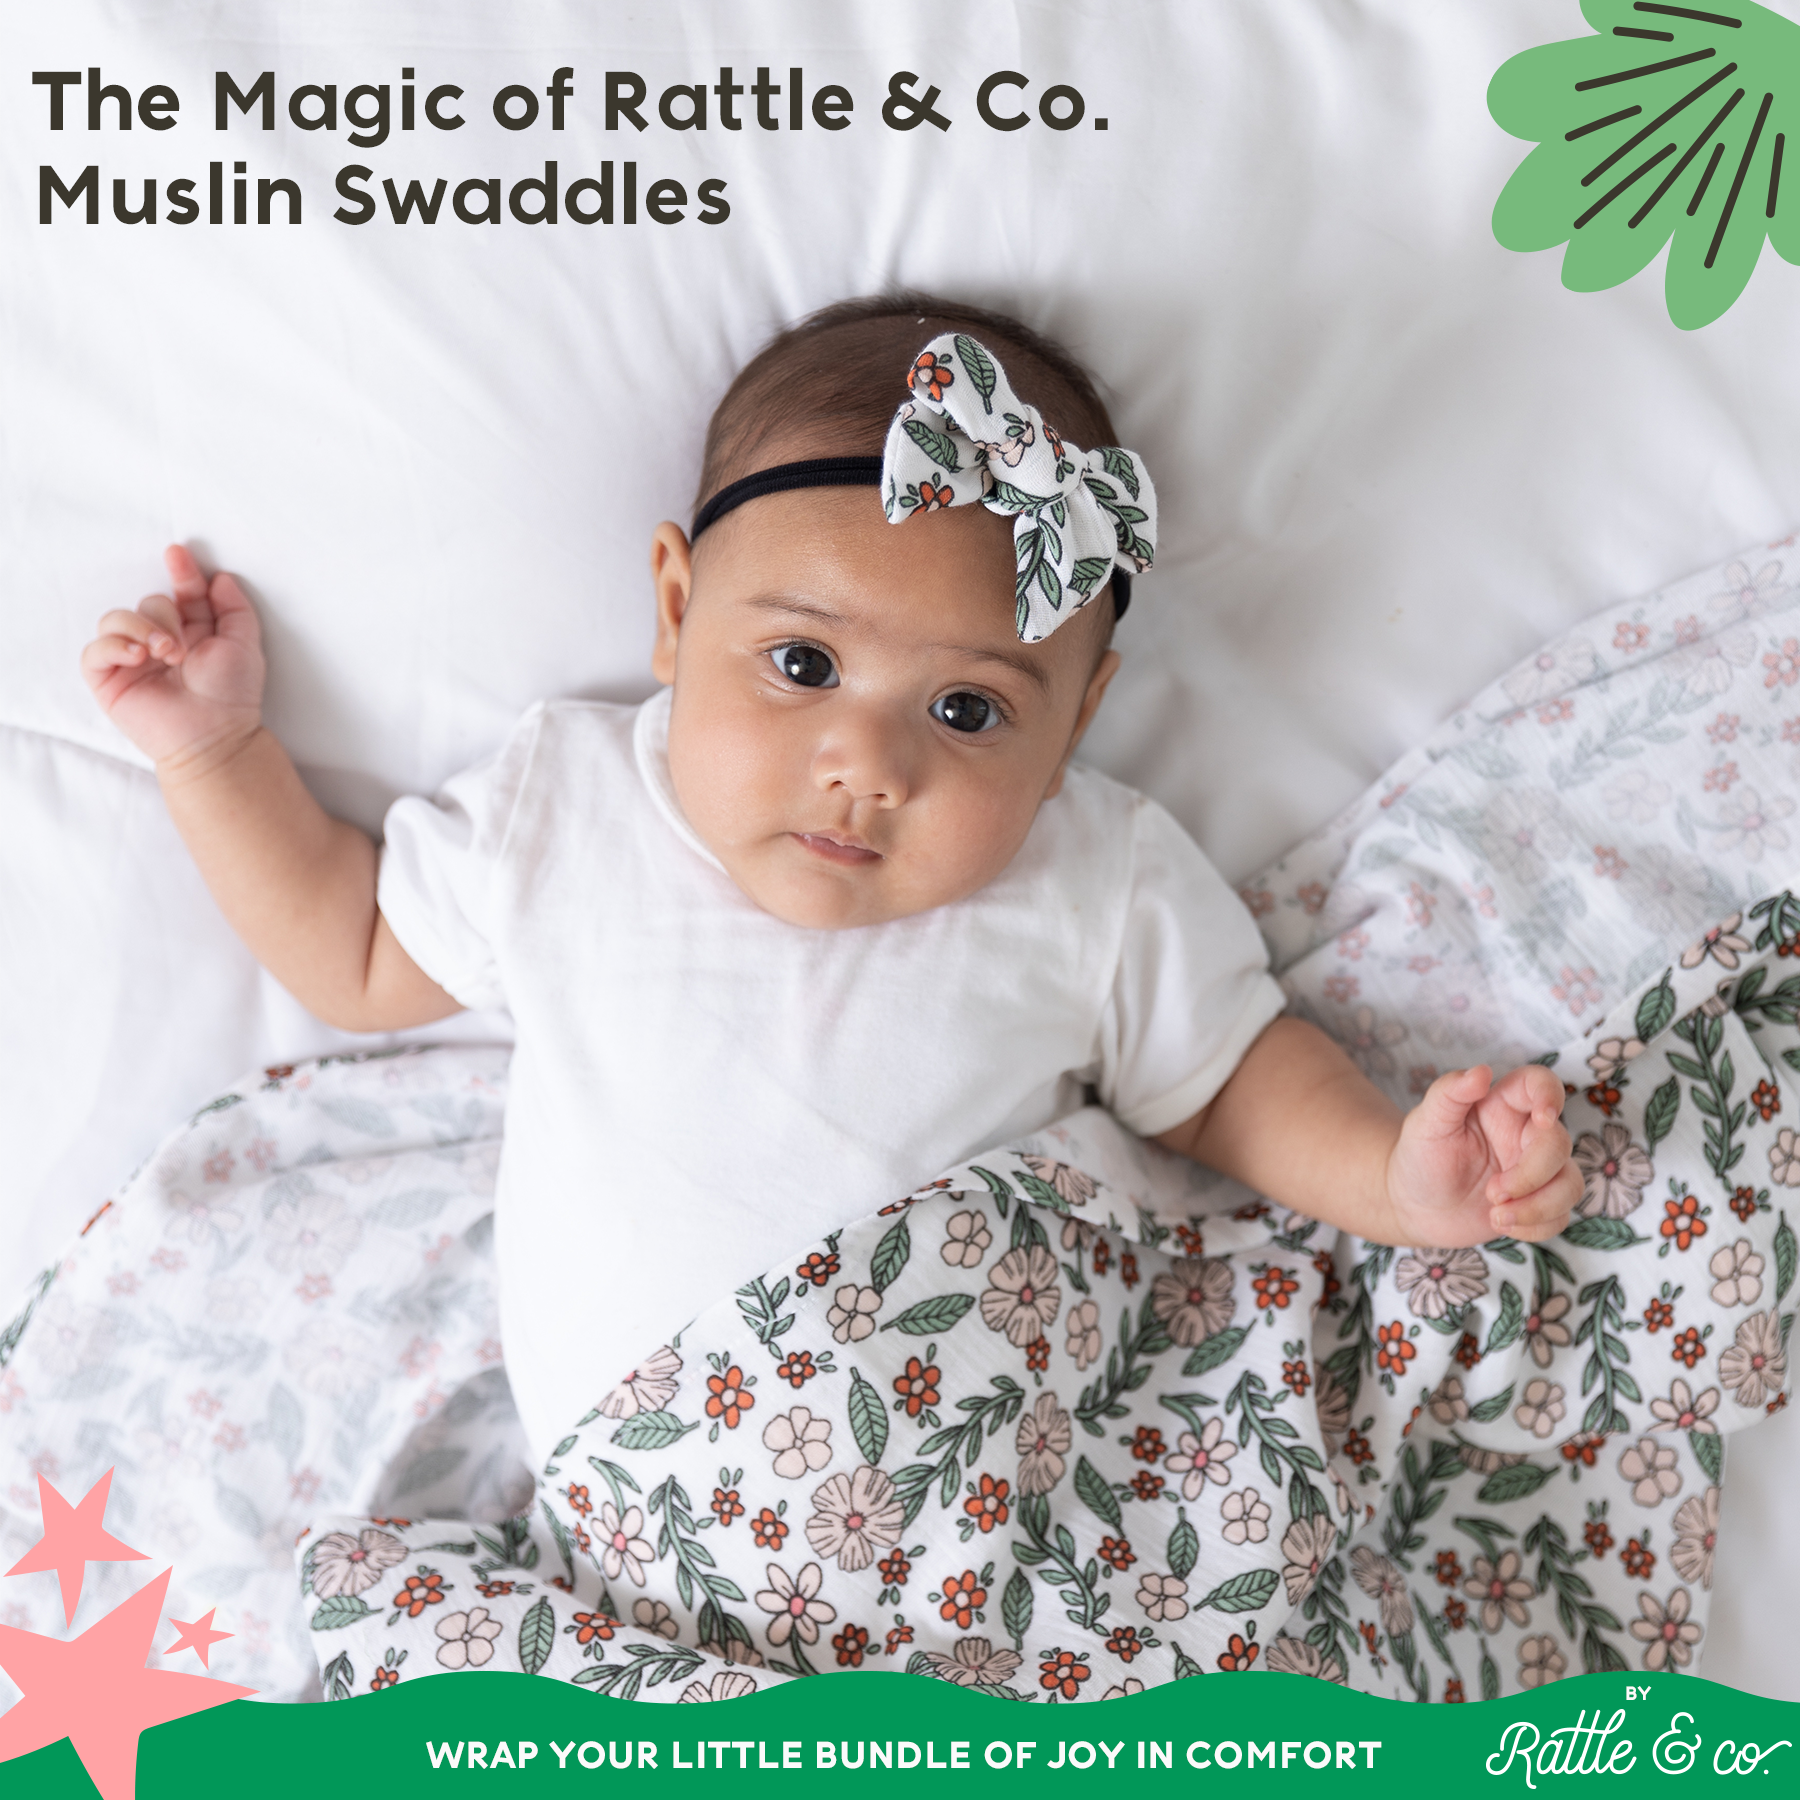 Wrap Your Little Bundle of Joy in Comfort: The Magic of Rattle & Co. Muslin Swaddles